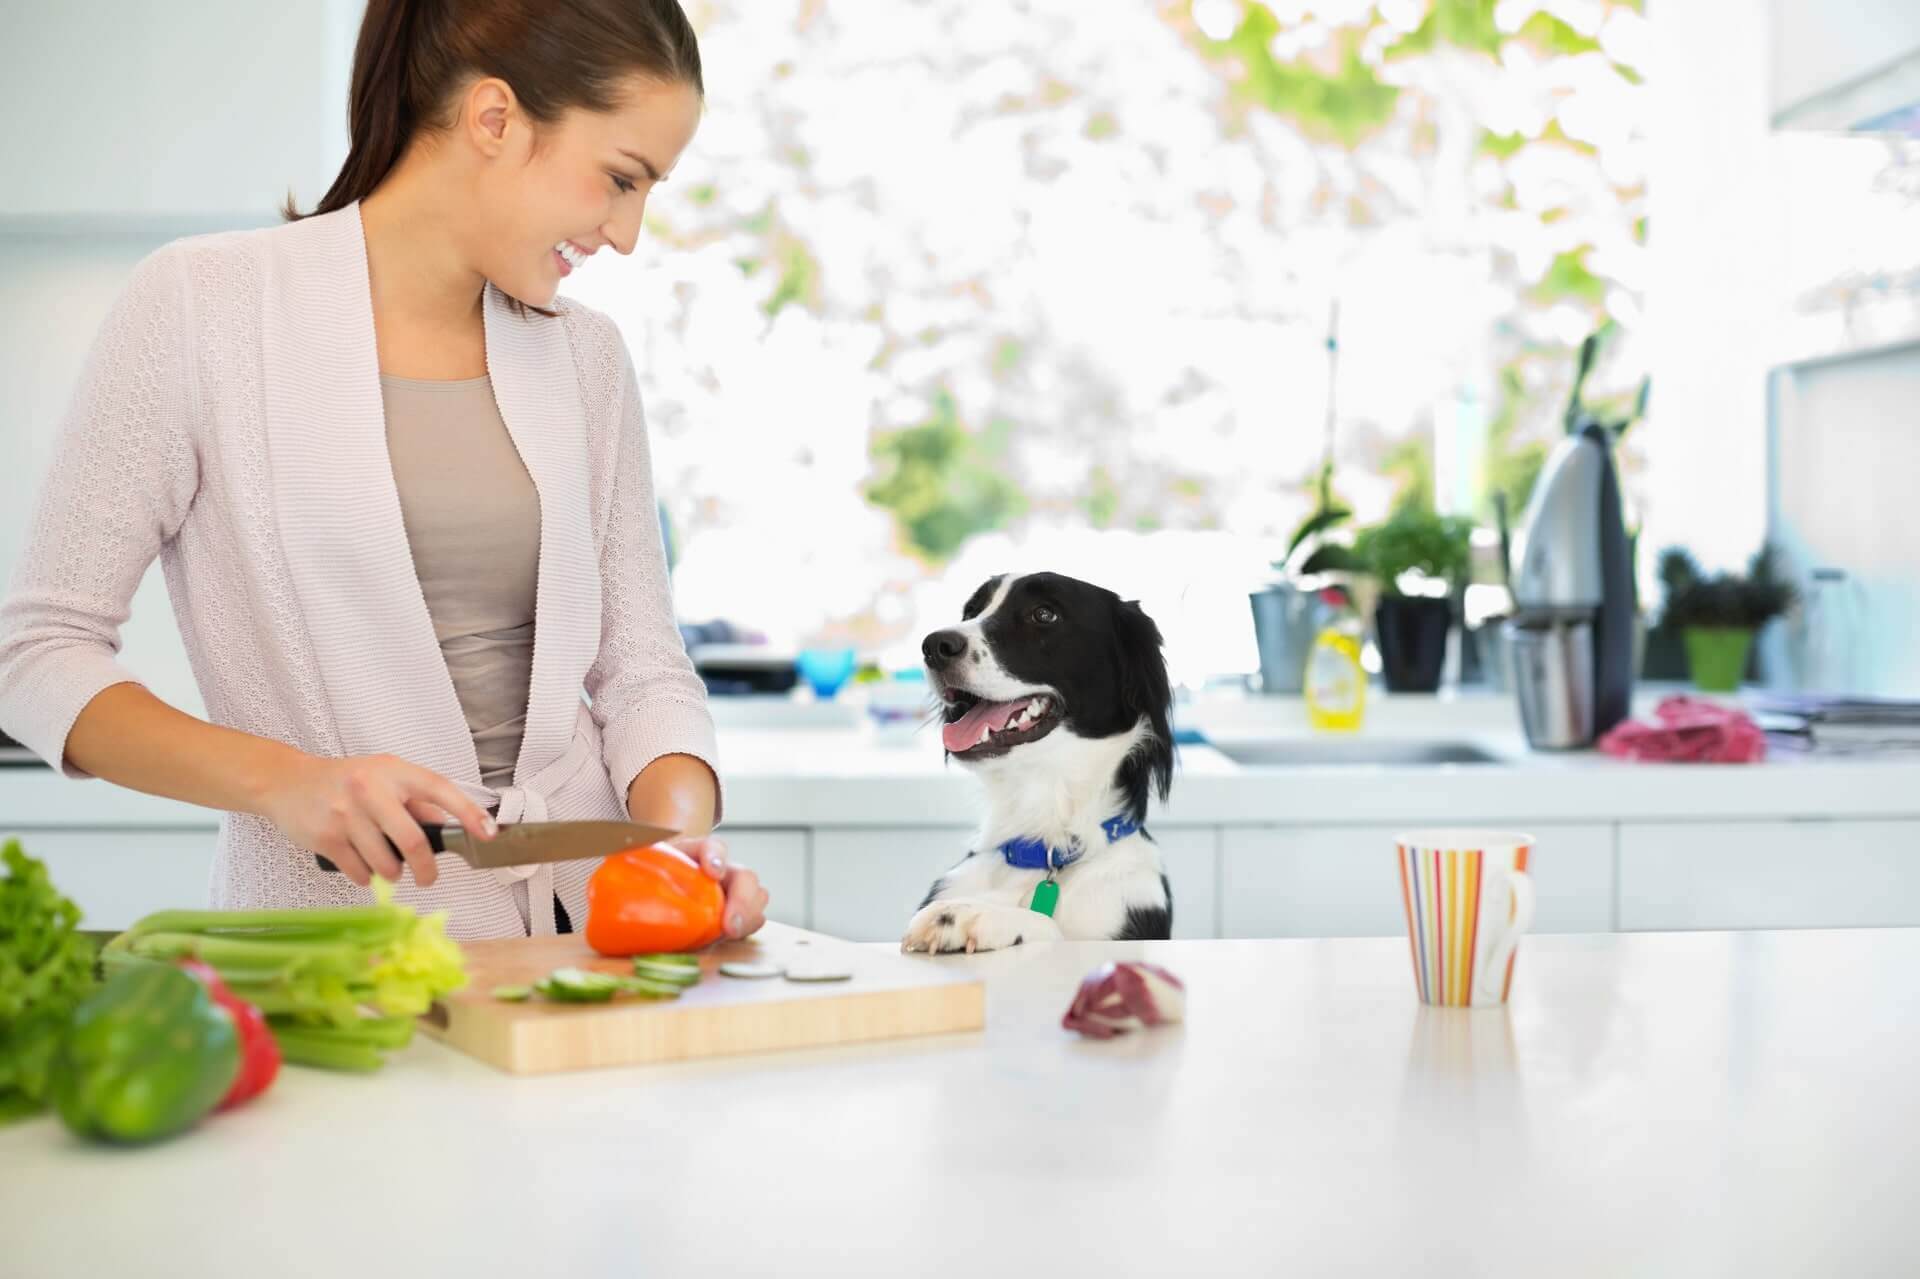 woman in kitchen chopping vegetables, dog looking up on counter